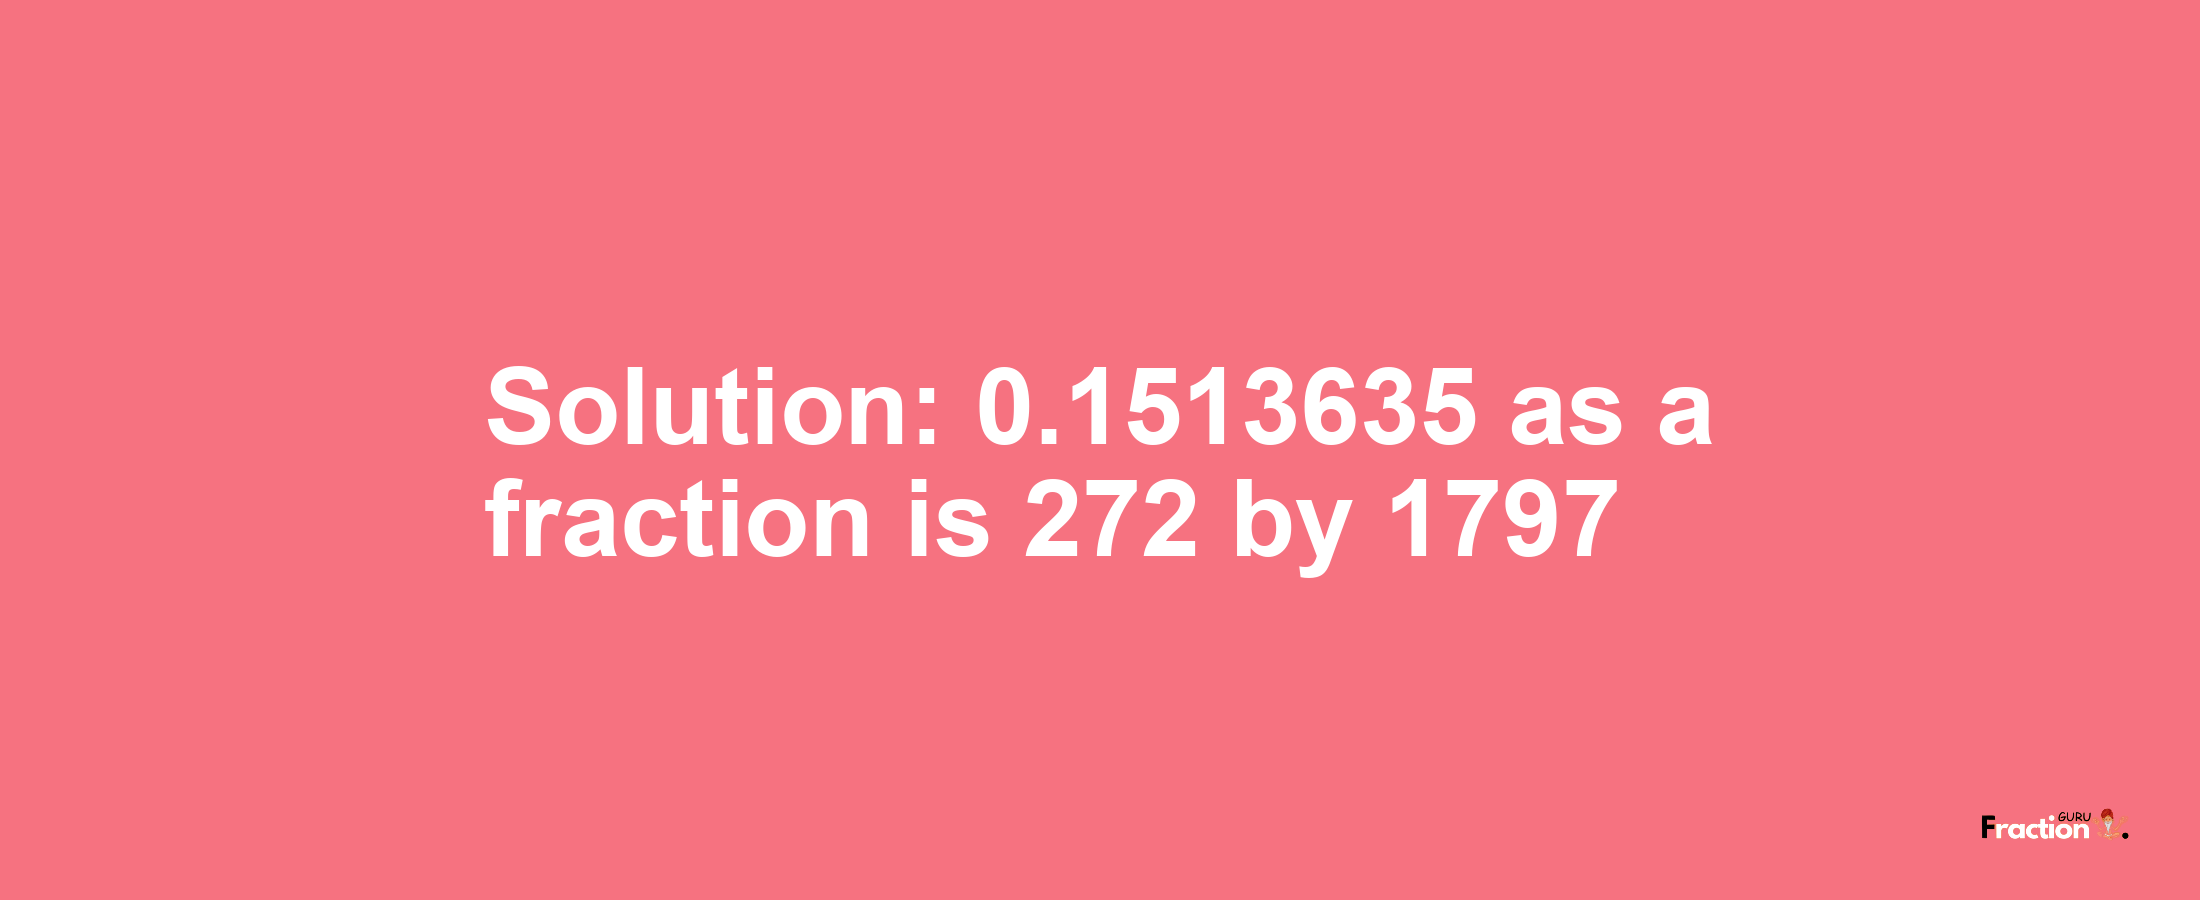 Solution:0.1513635 as a fraction is 272/1797